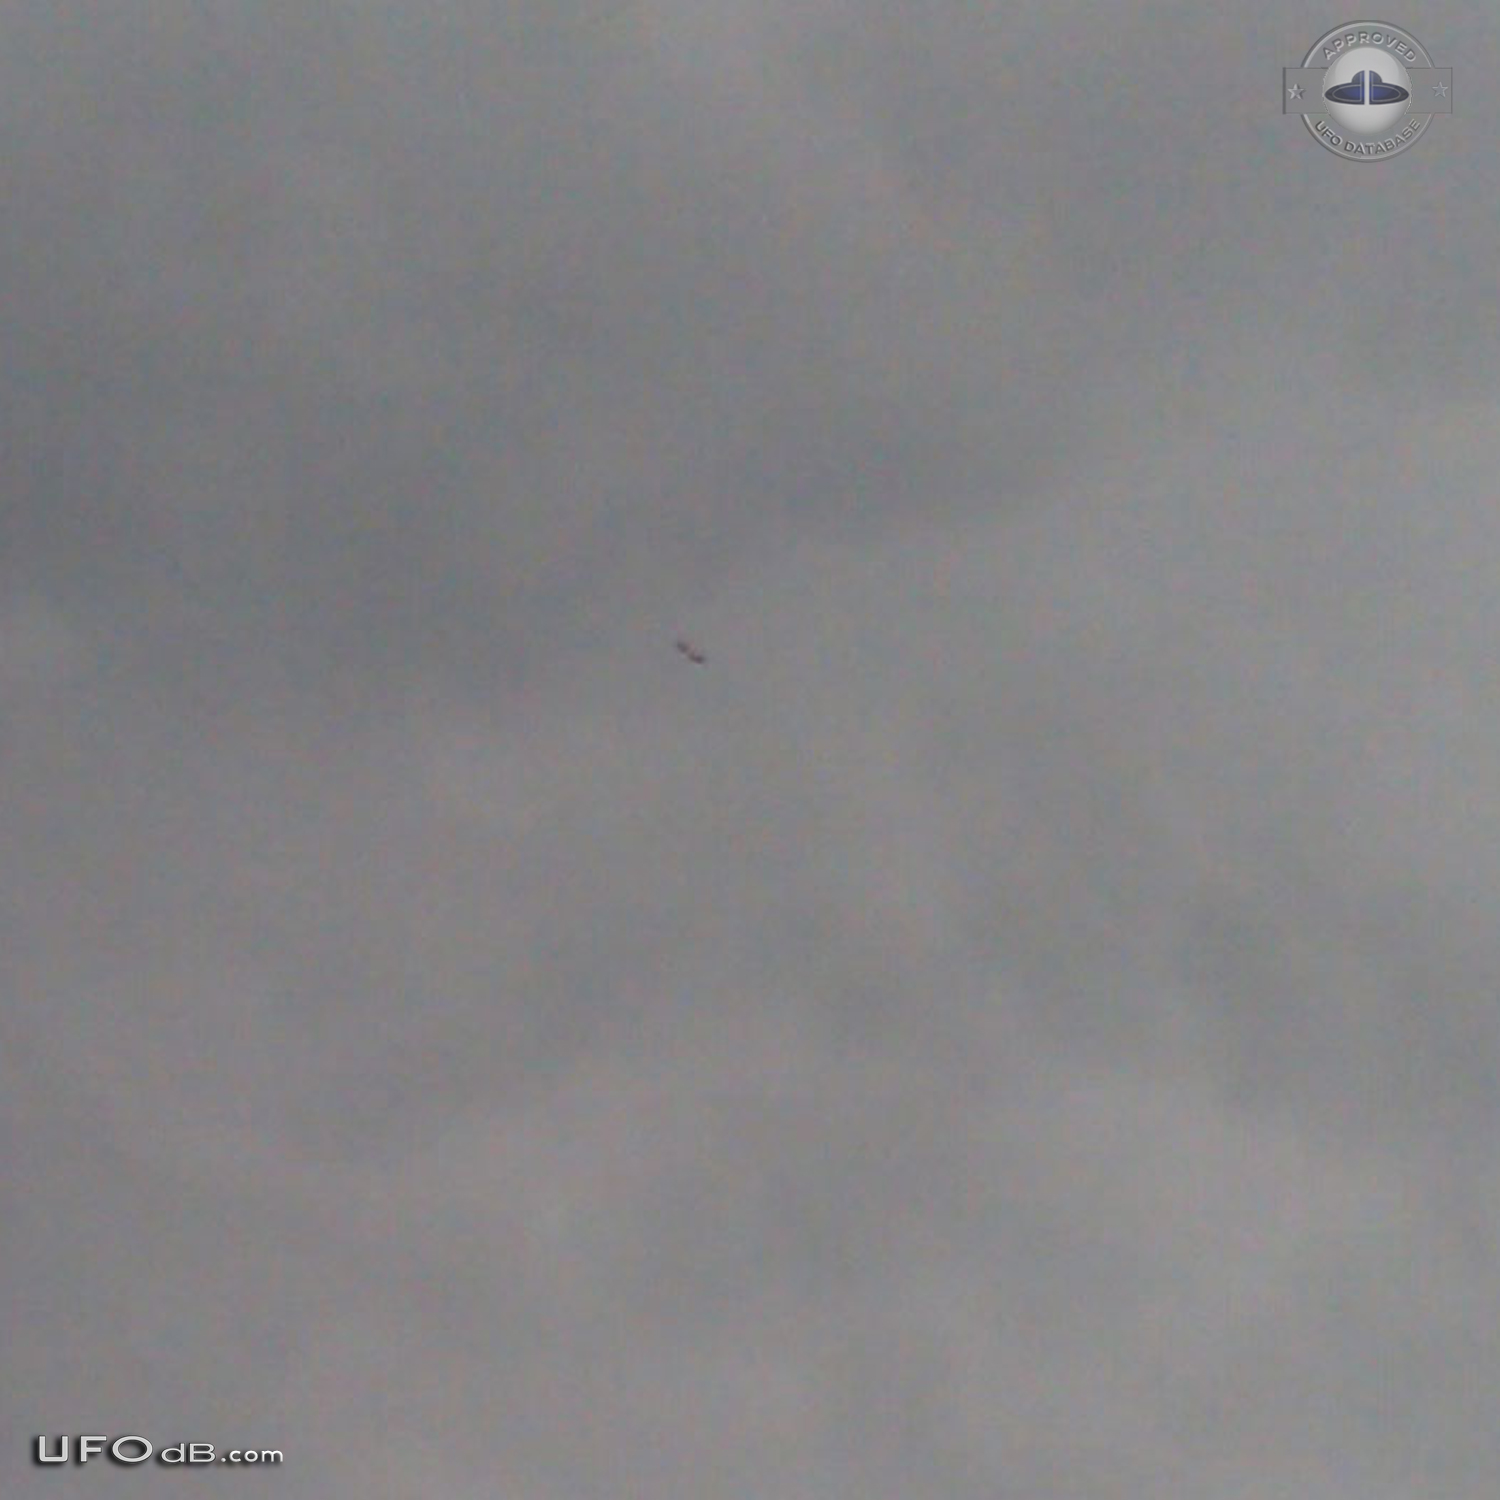 UFO in the clouds of Christchurch,Canterbury in New Zealand 2014 UFO Picture #613-5